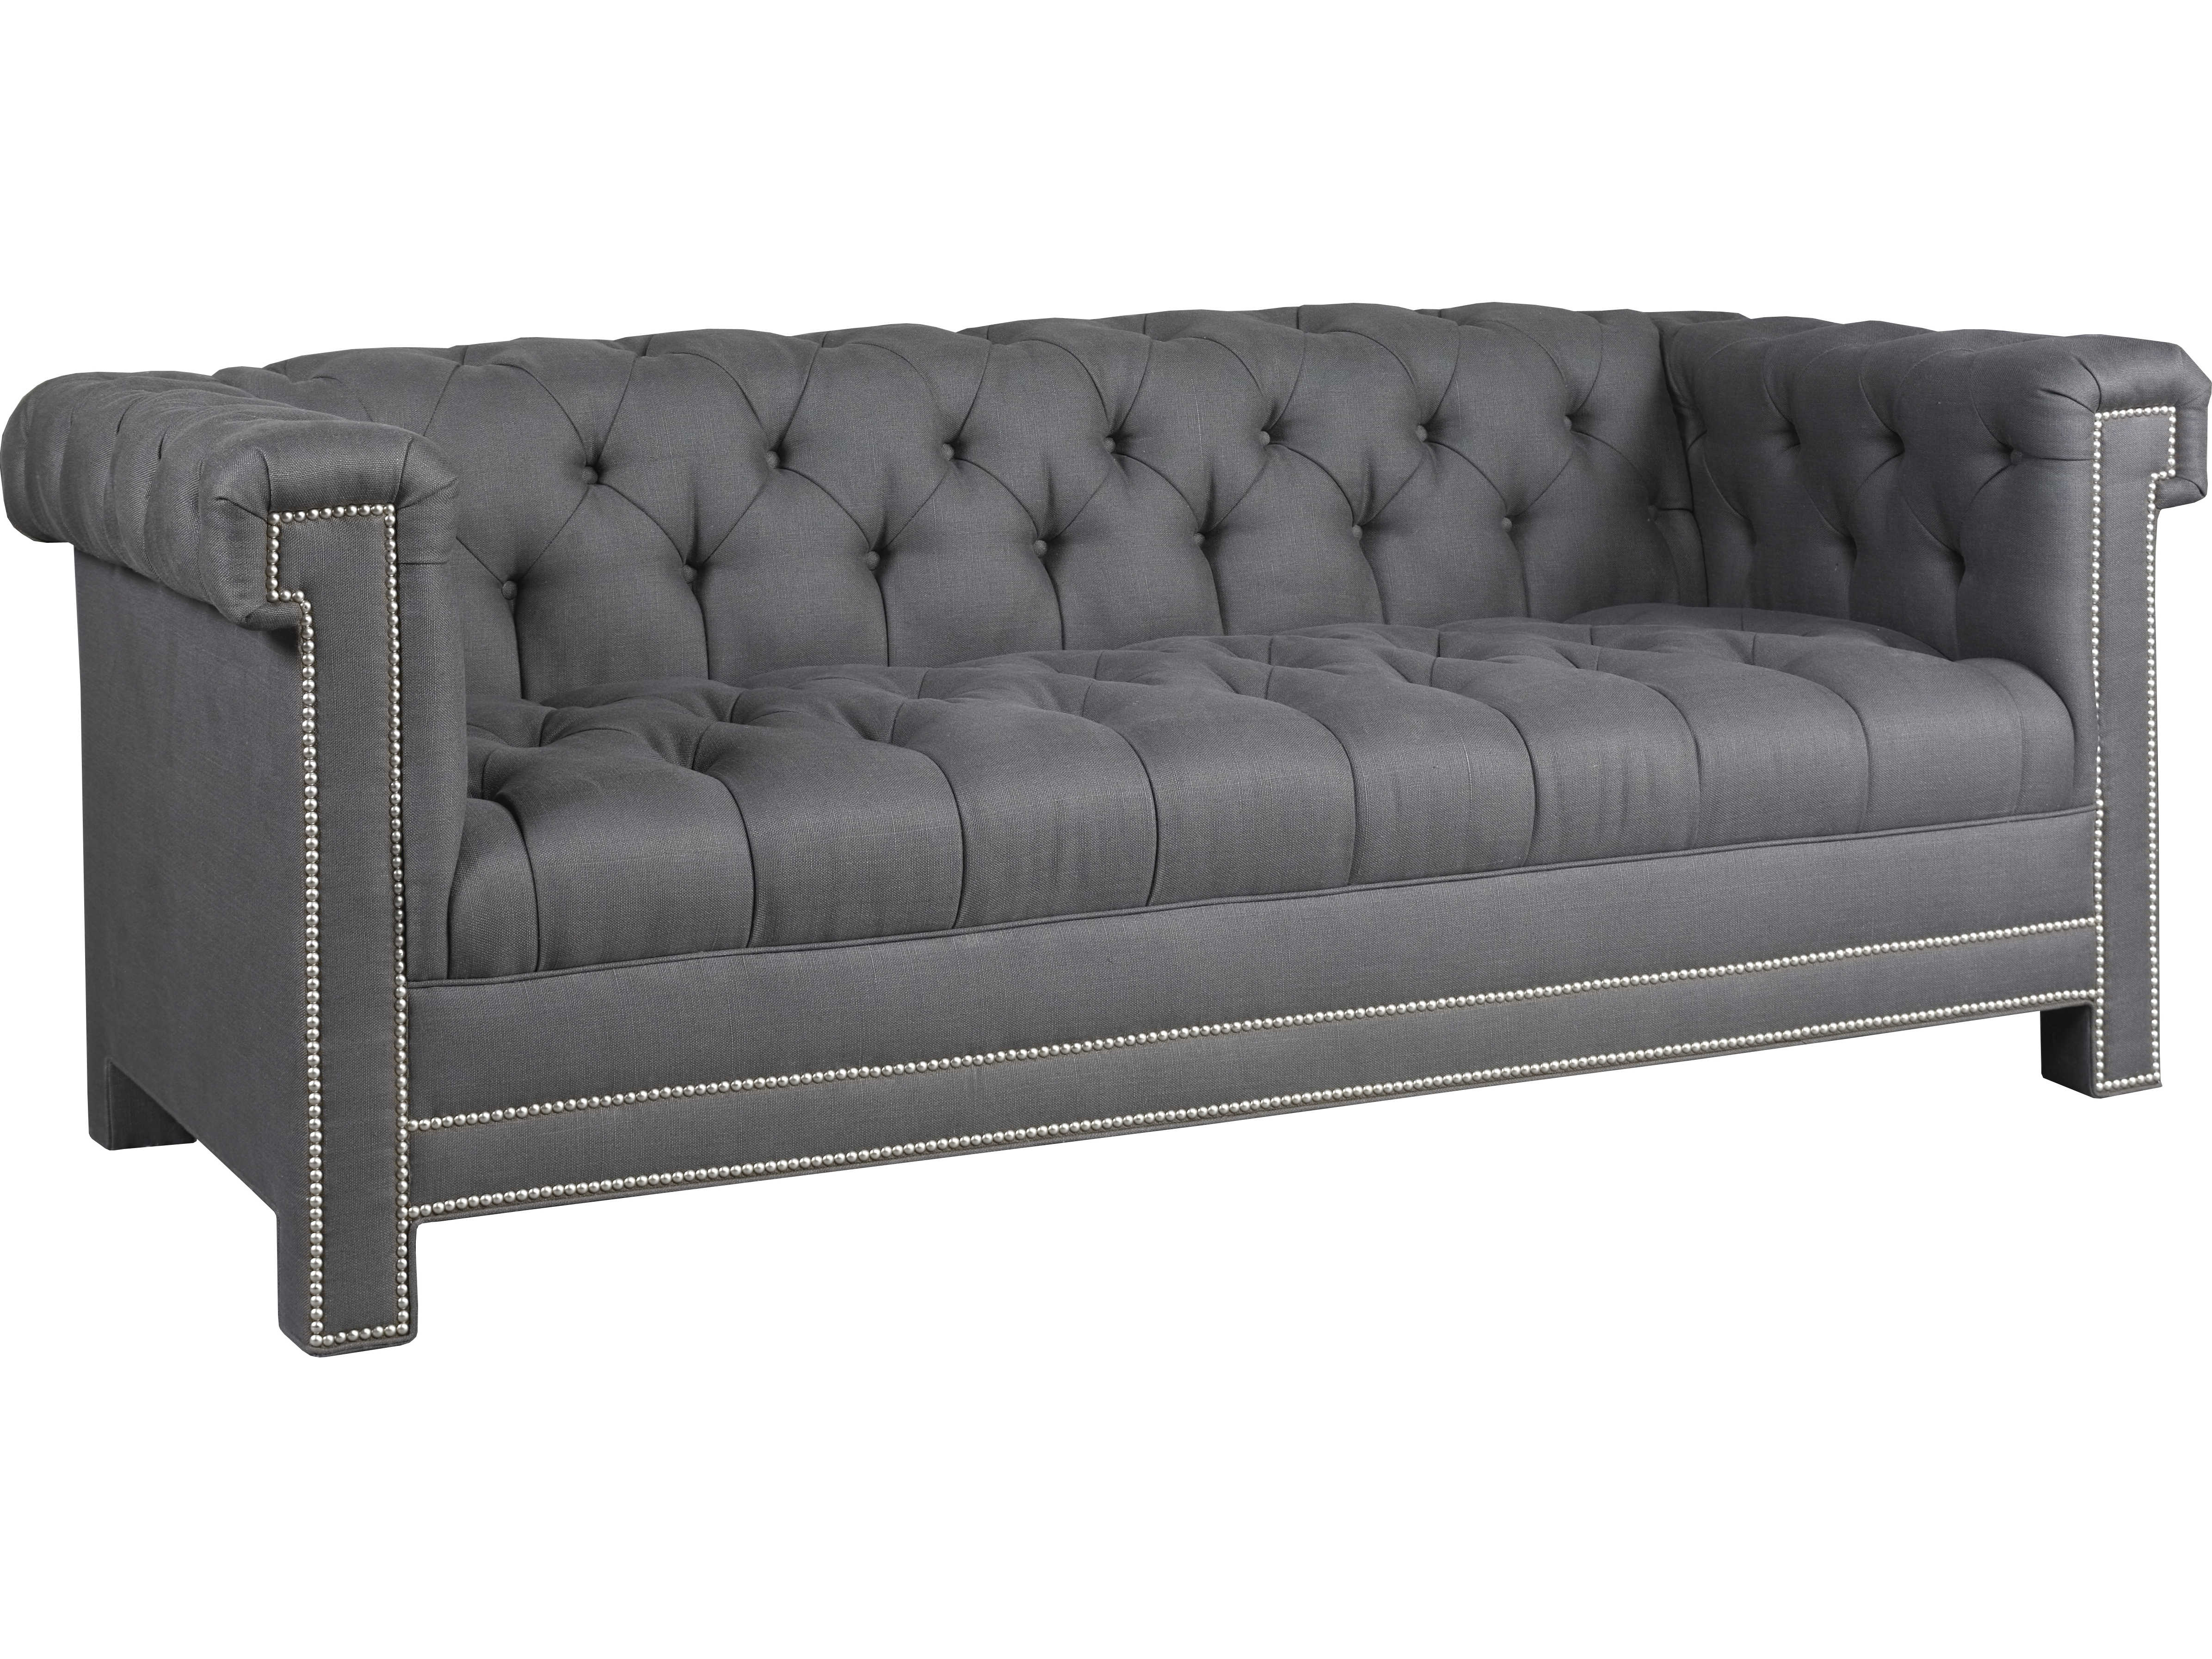 Lillian August Upholstery Sofa Couch | LNALA7150M